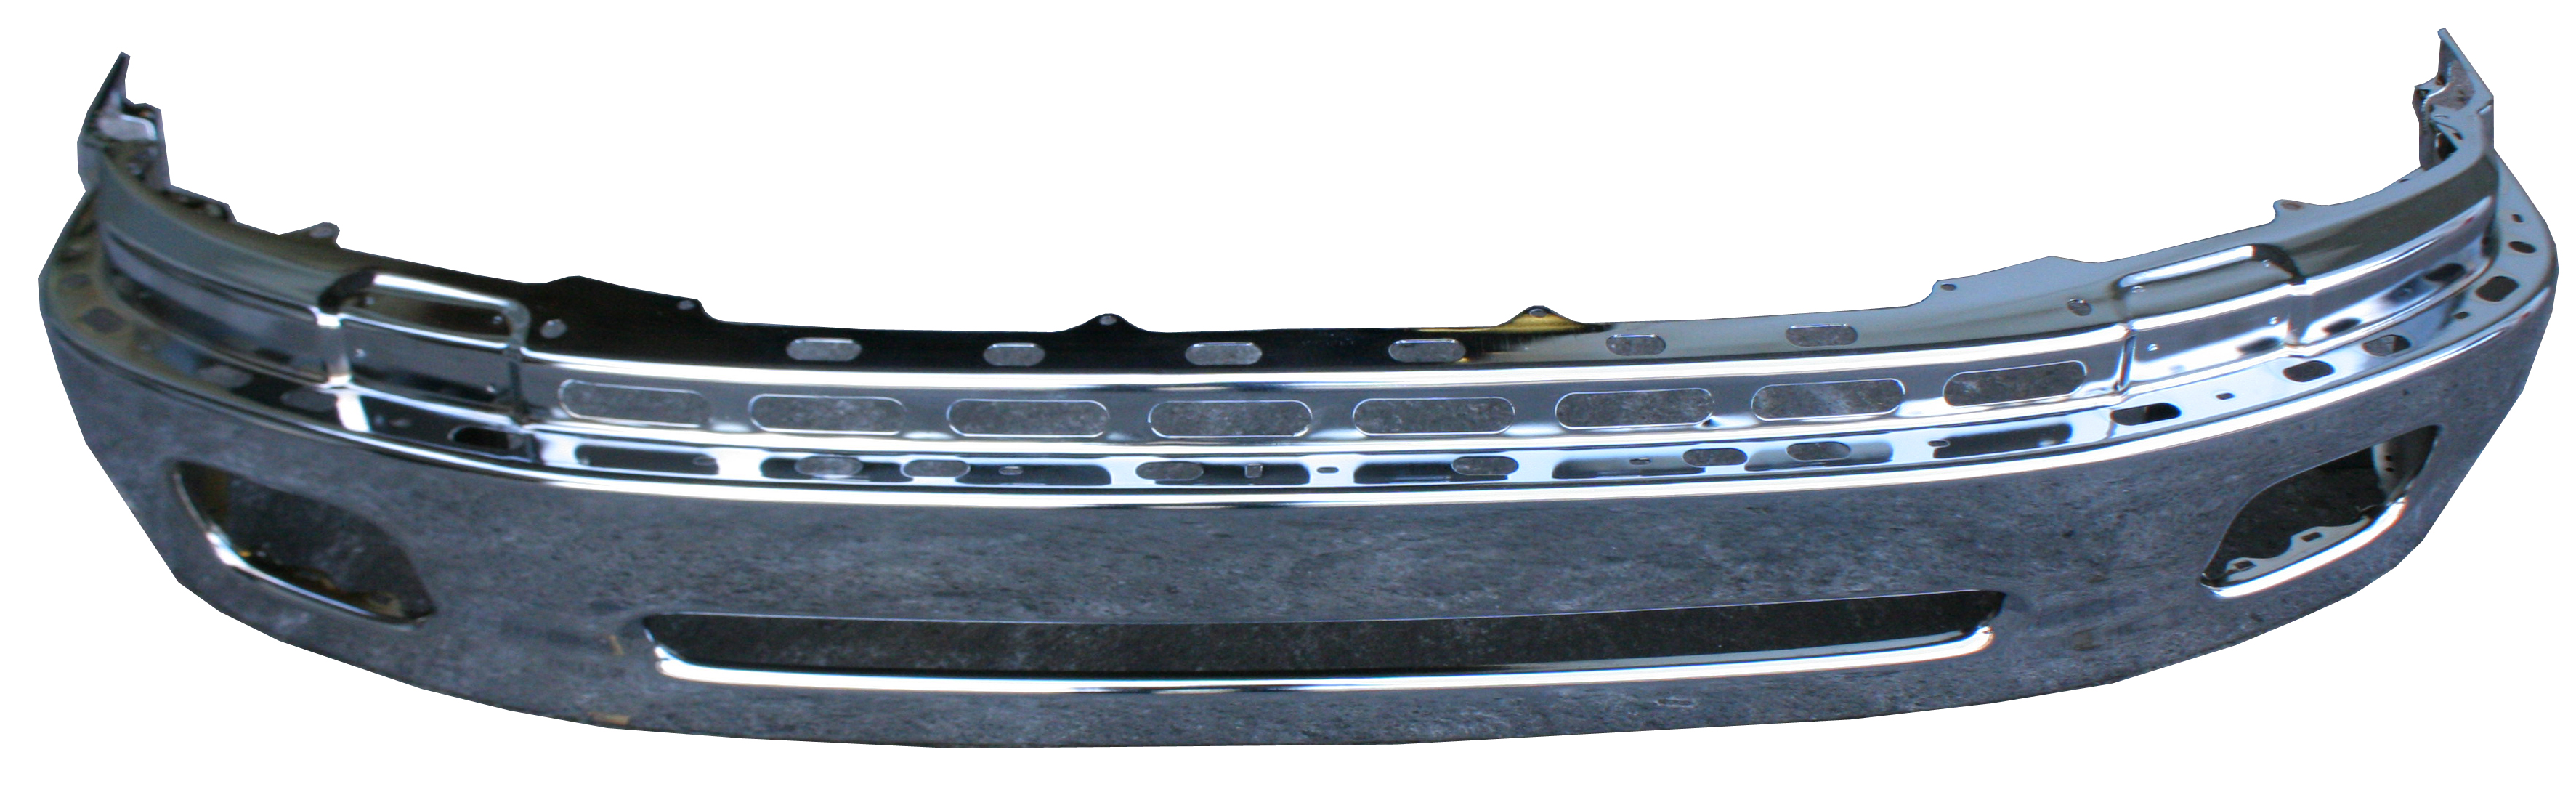 Aftermarket METAL FRONT BUMPERS for TOYOTA - TUNDRA, TUNDRA,00-06,Front bumper face bar